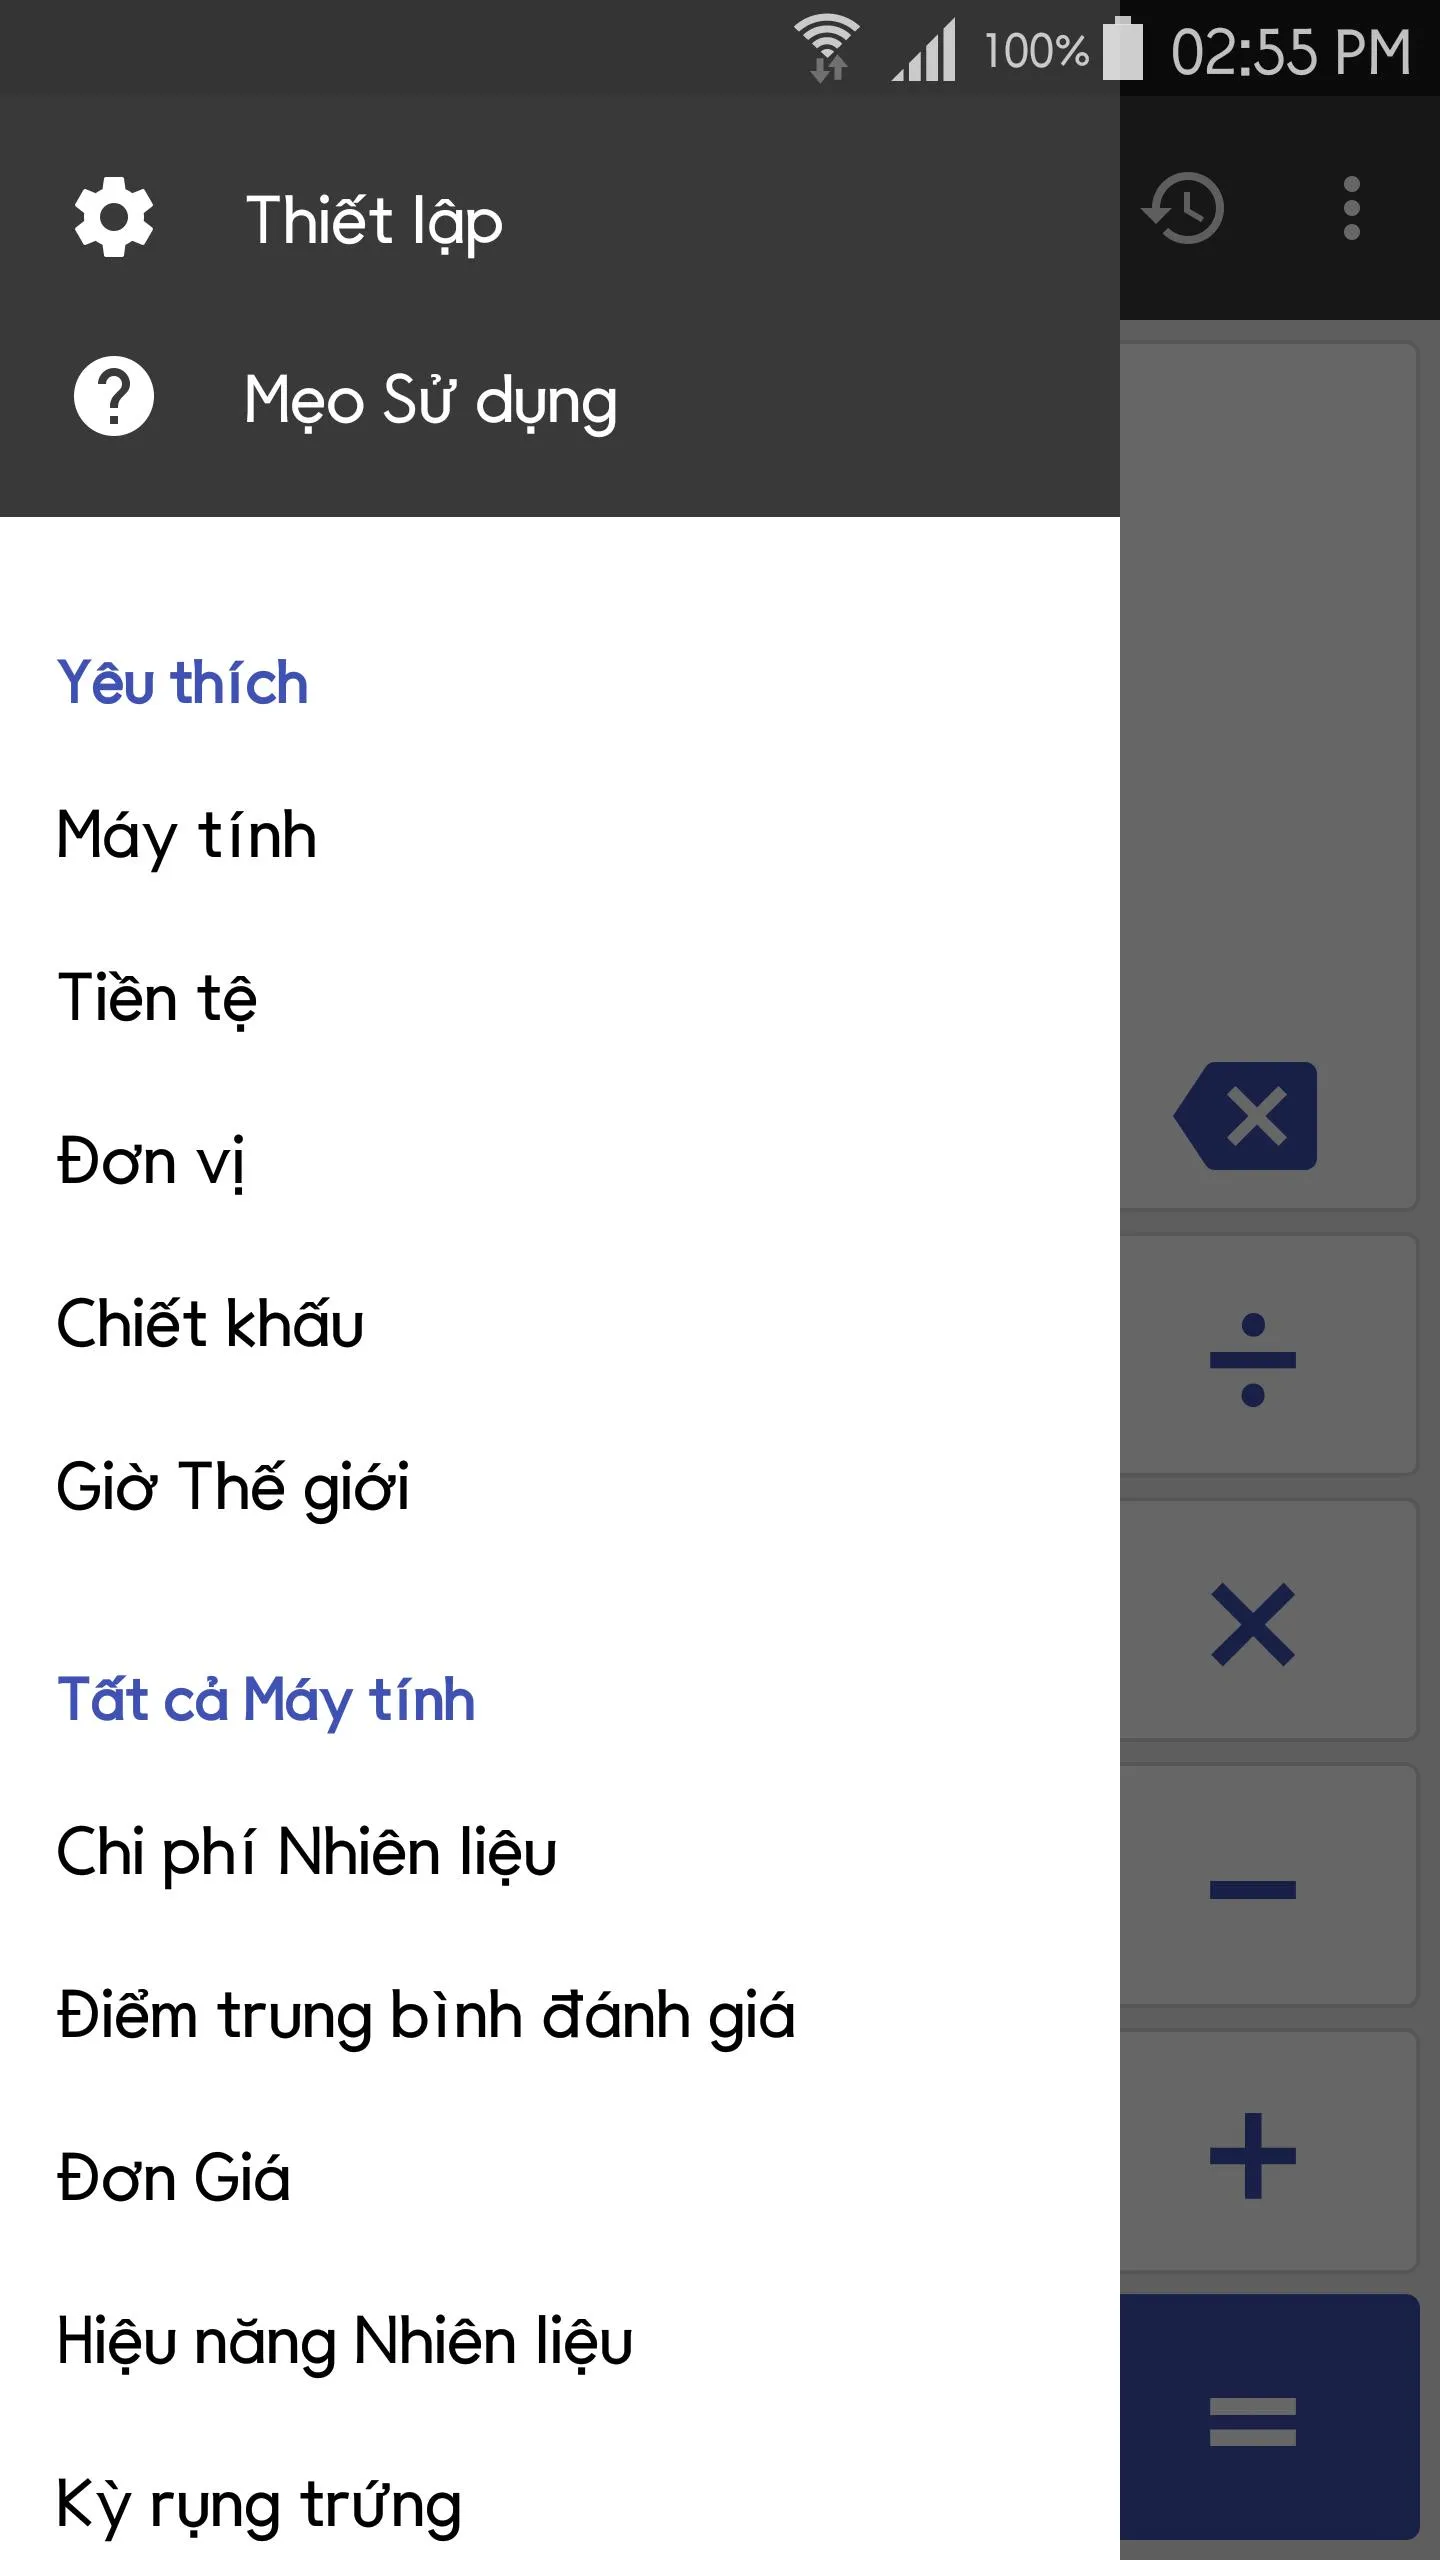 voh.com.vn-ung-dung-may-tinh-tren-dien-thoai-anh-4